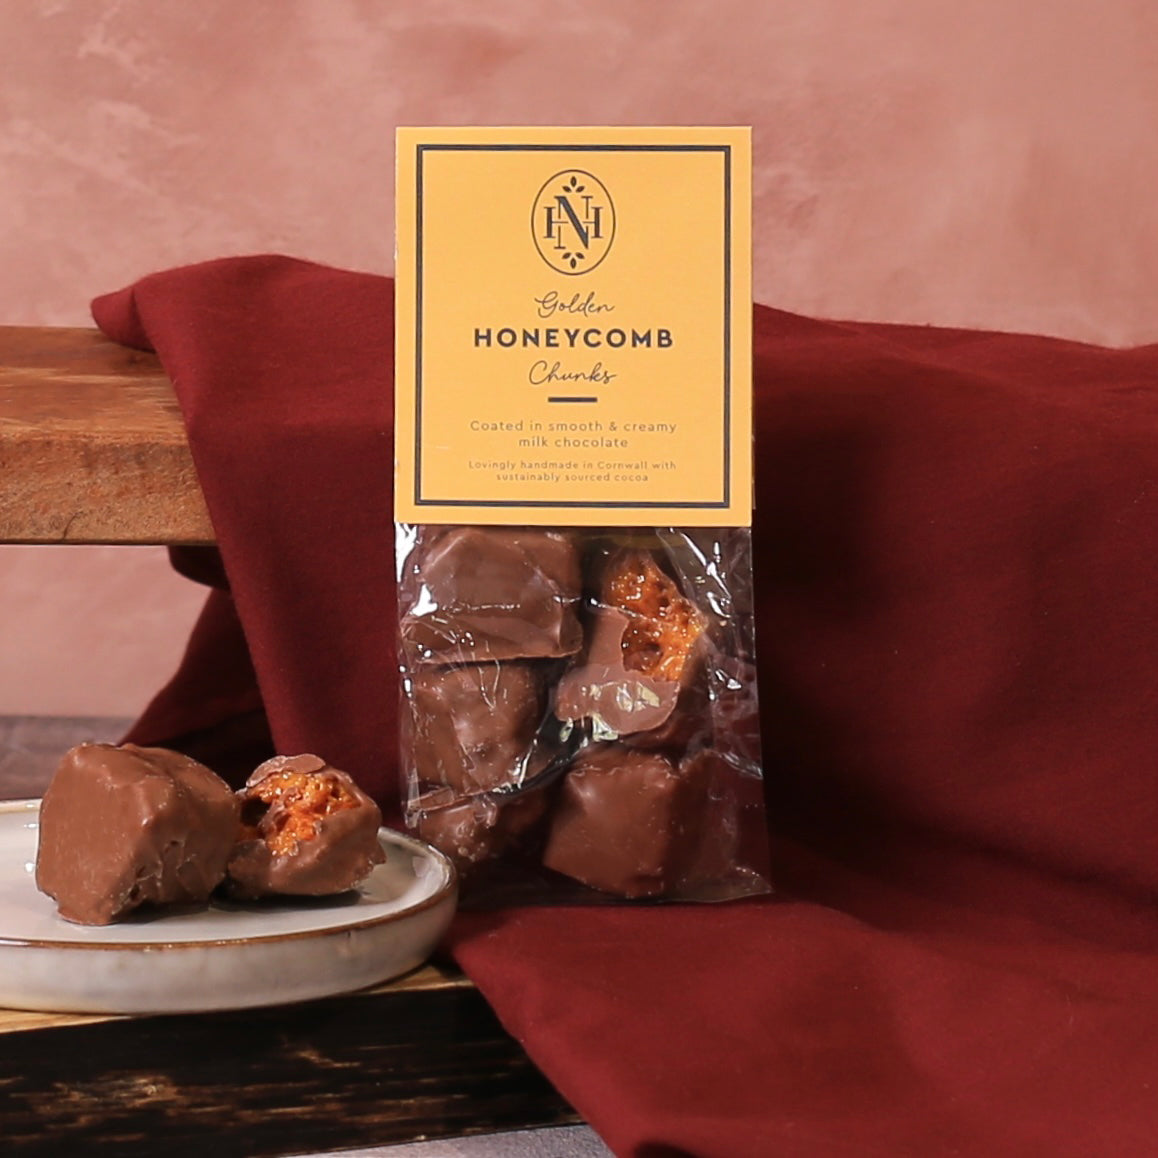 The Noble House Coffee and Chocolate Hamper